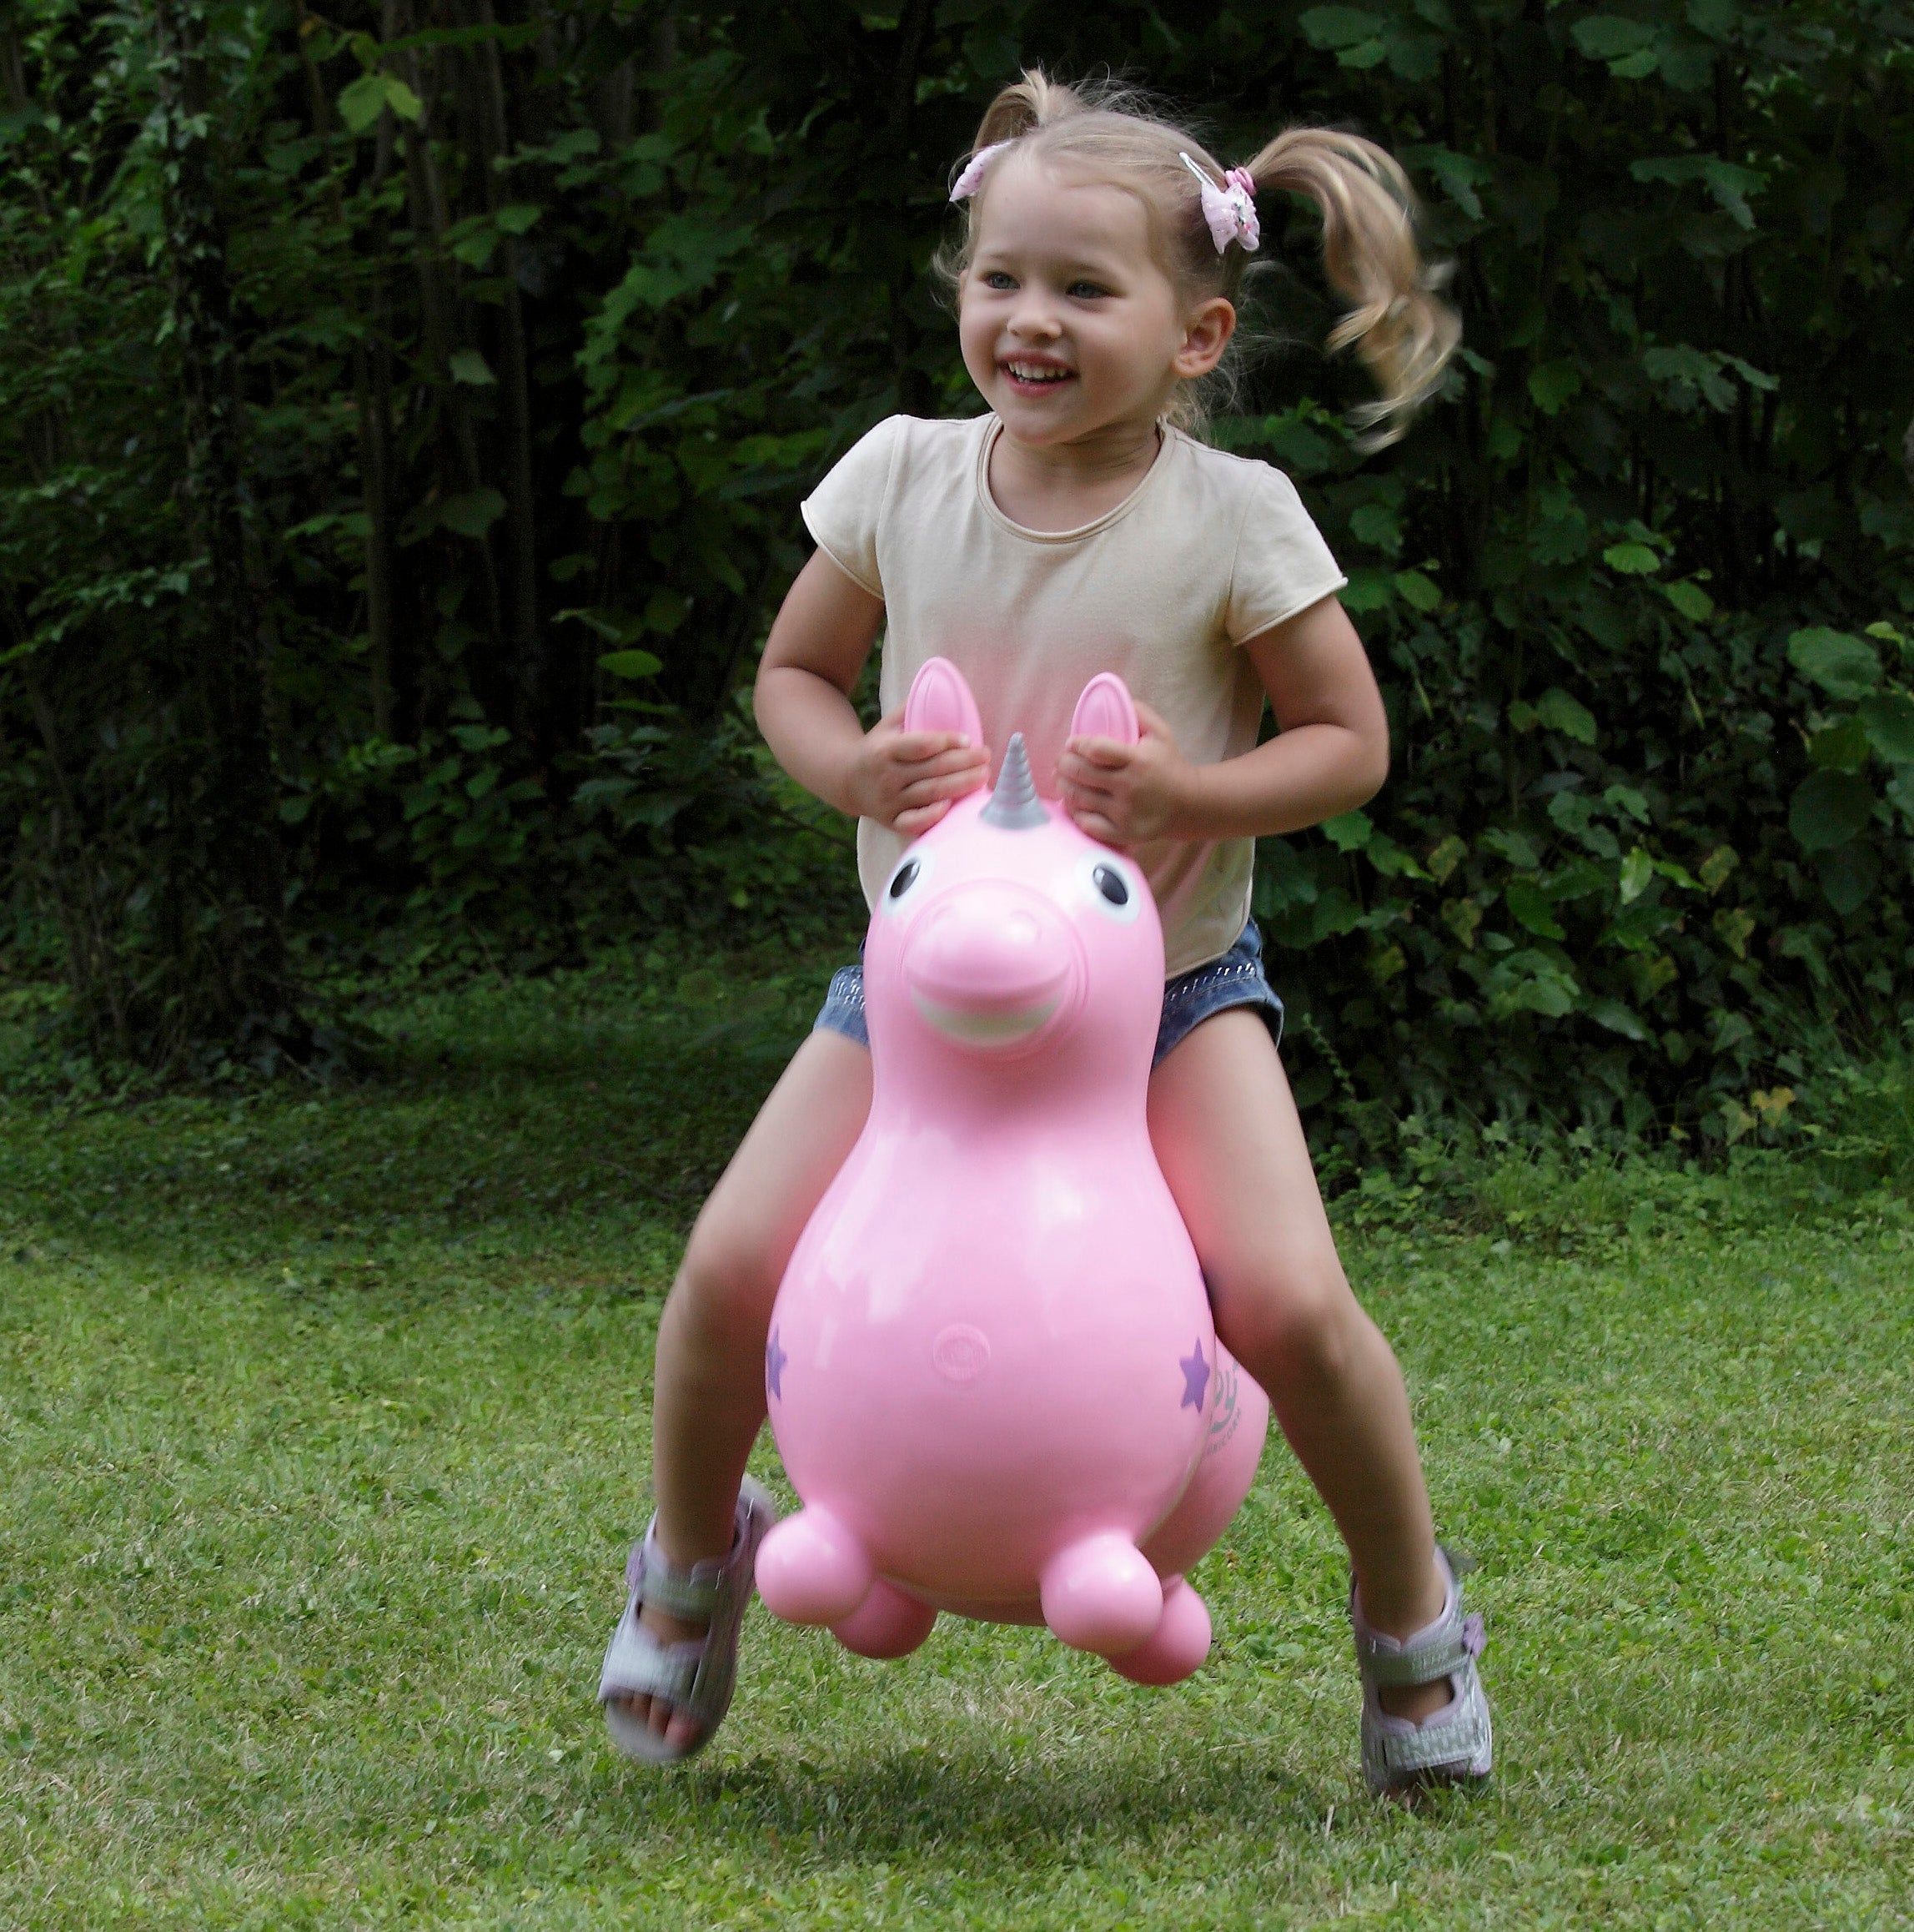 Lifestyle image of the pink Rody Magical Unicorn with little girl bouncing on it.